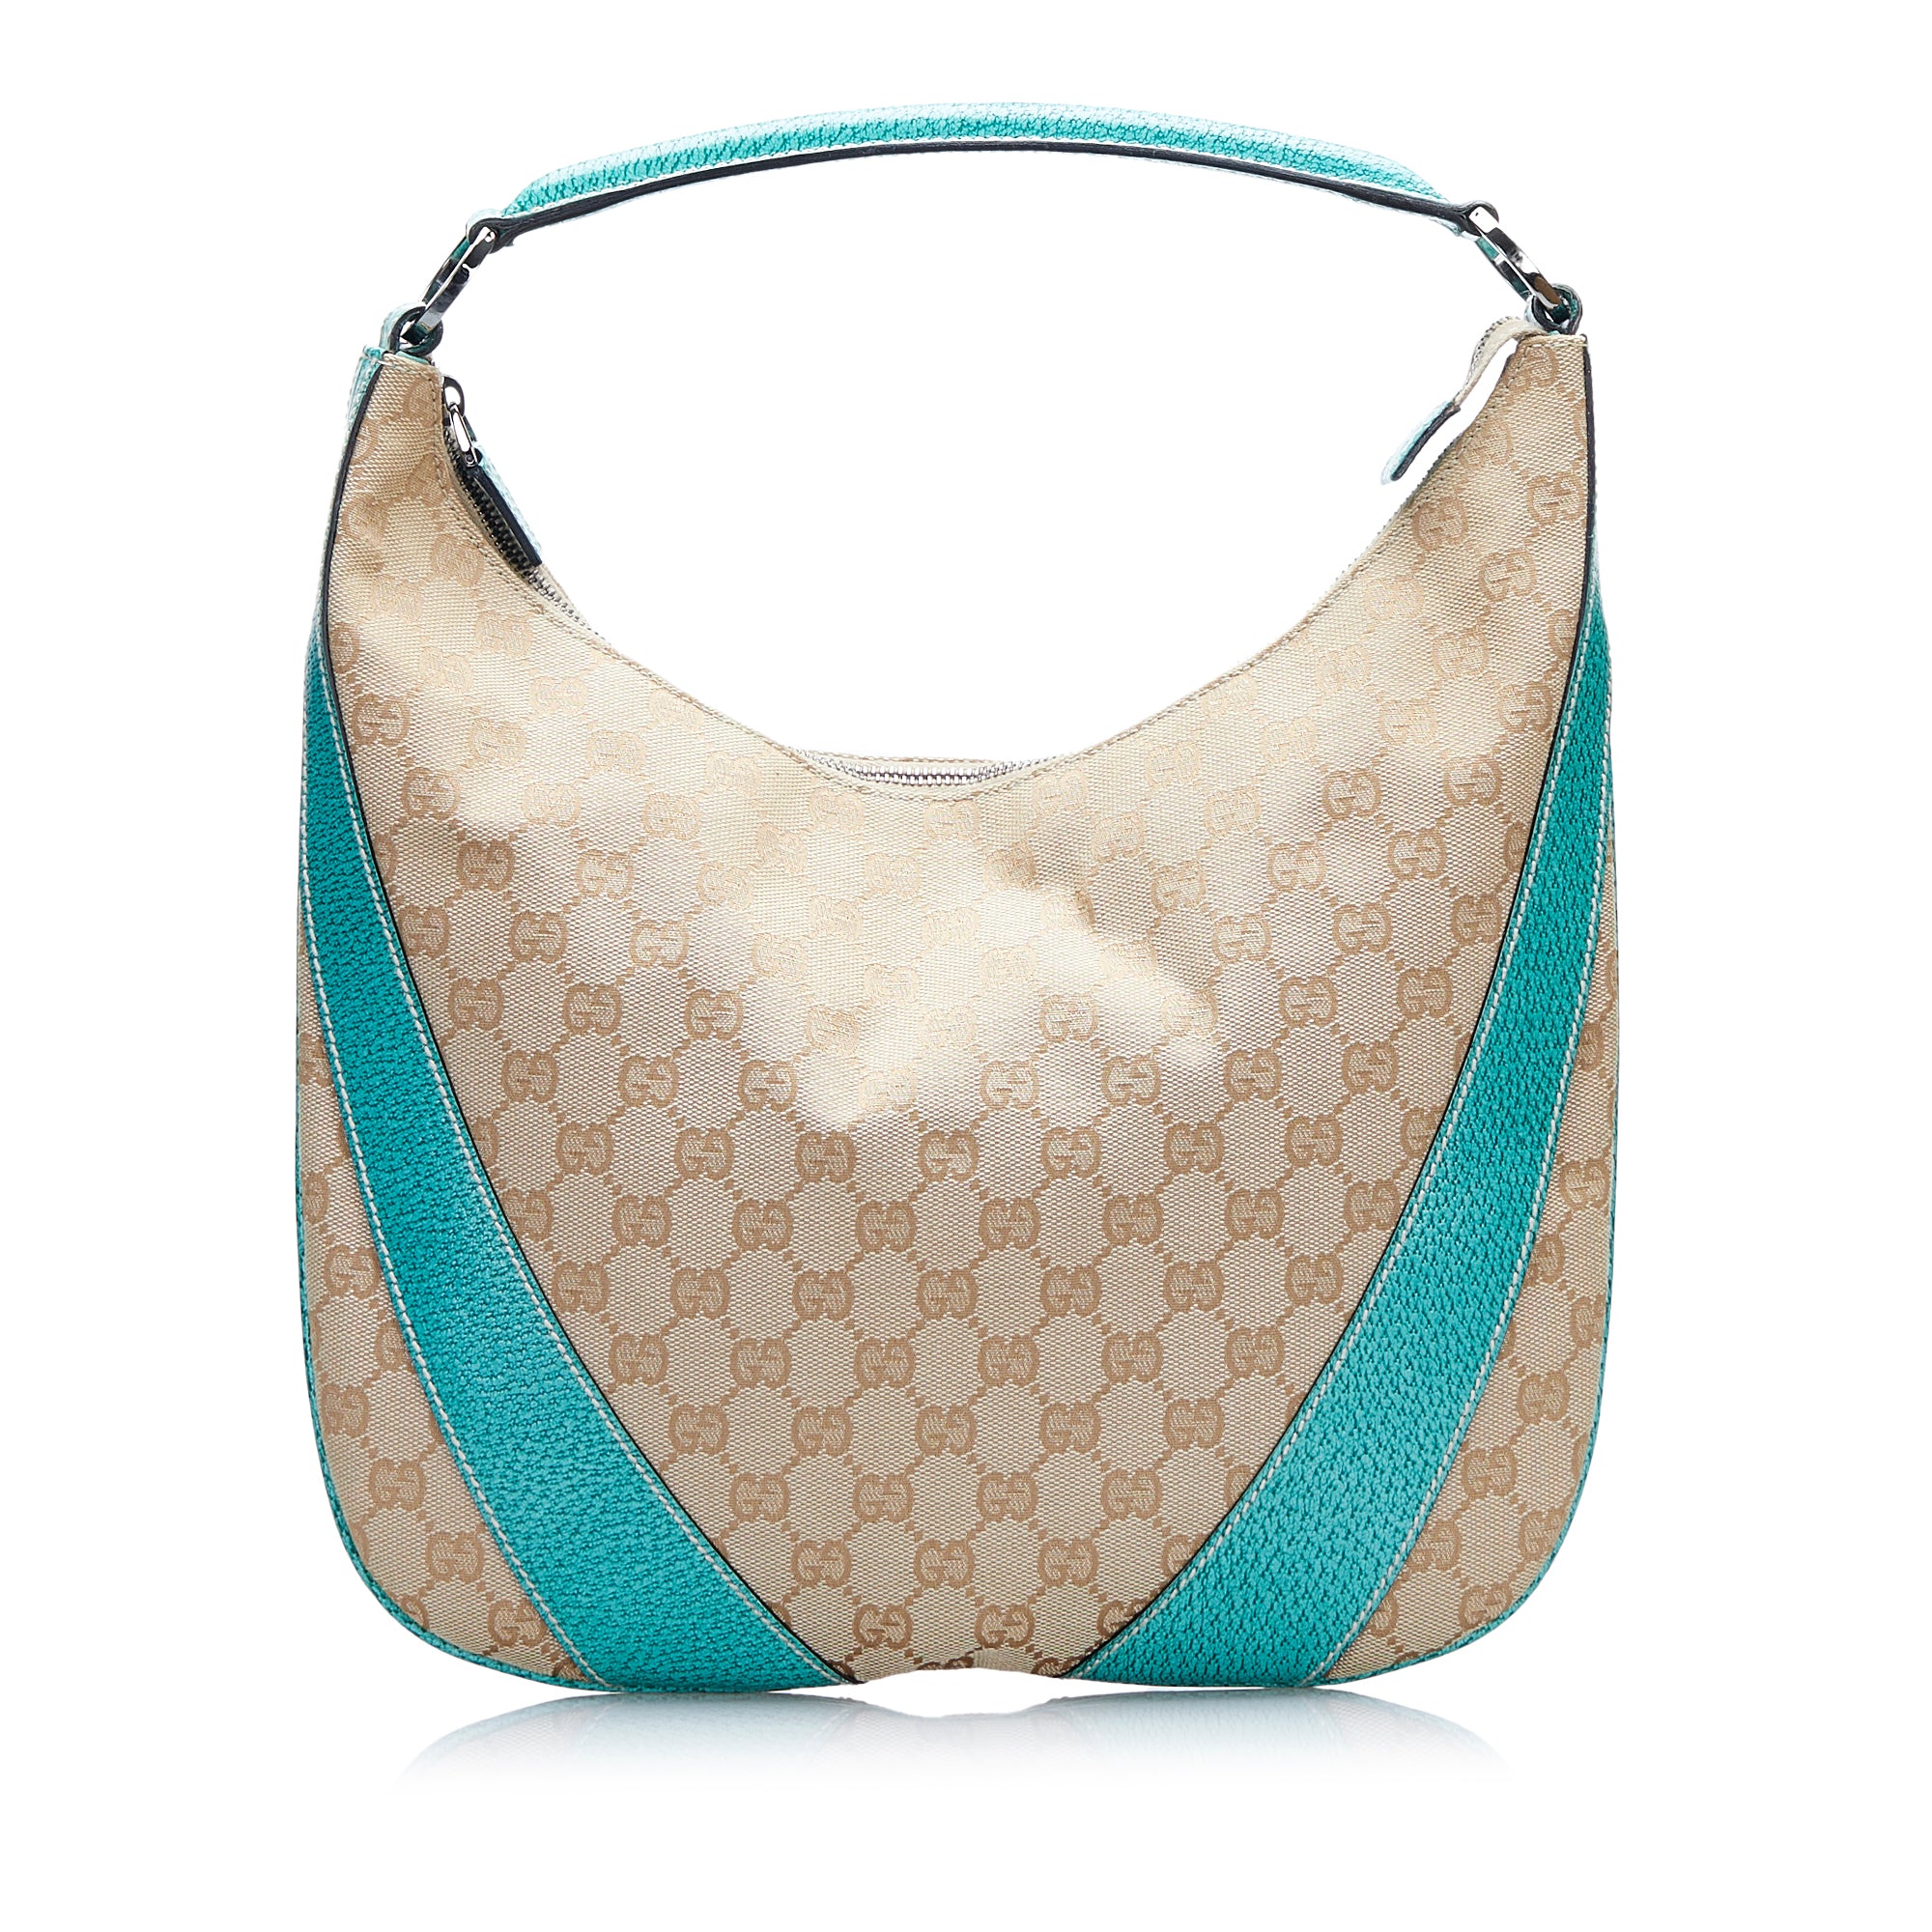 Gucci Turquoise Leather New Jackie Medium Hobo Bag Gucci